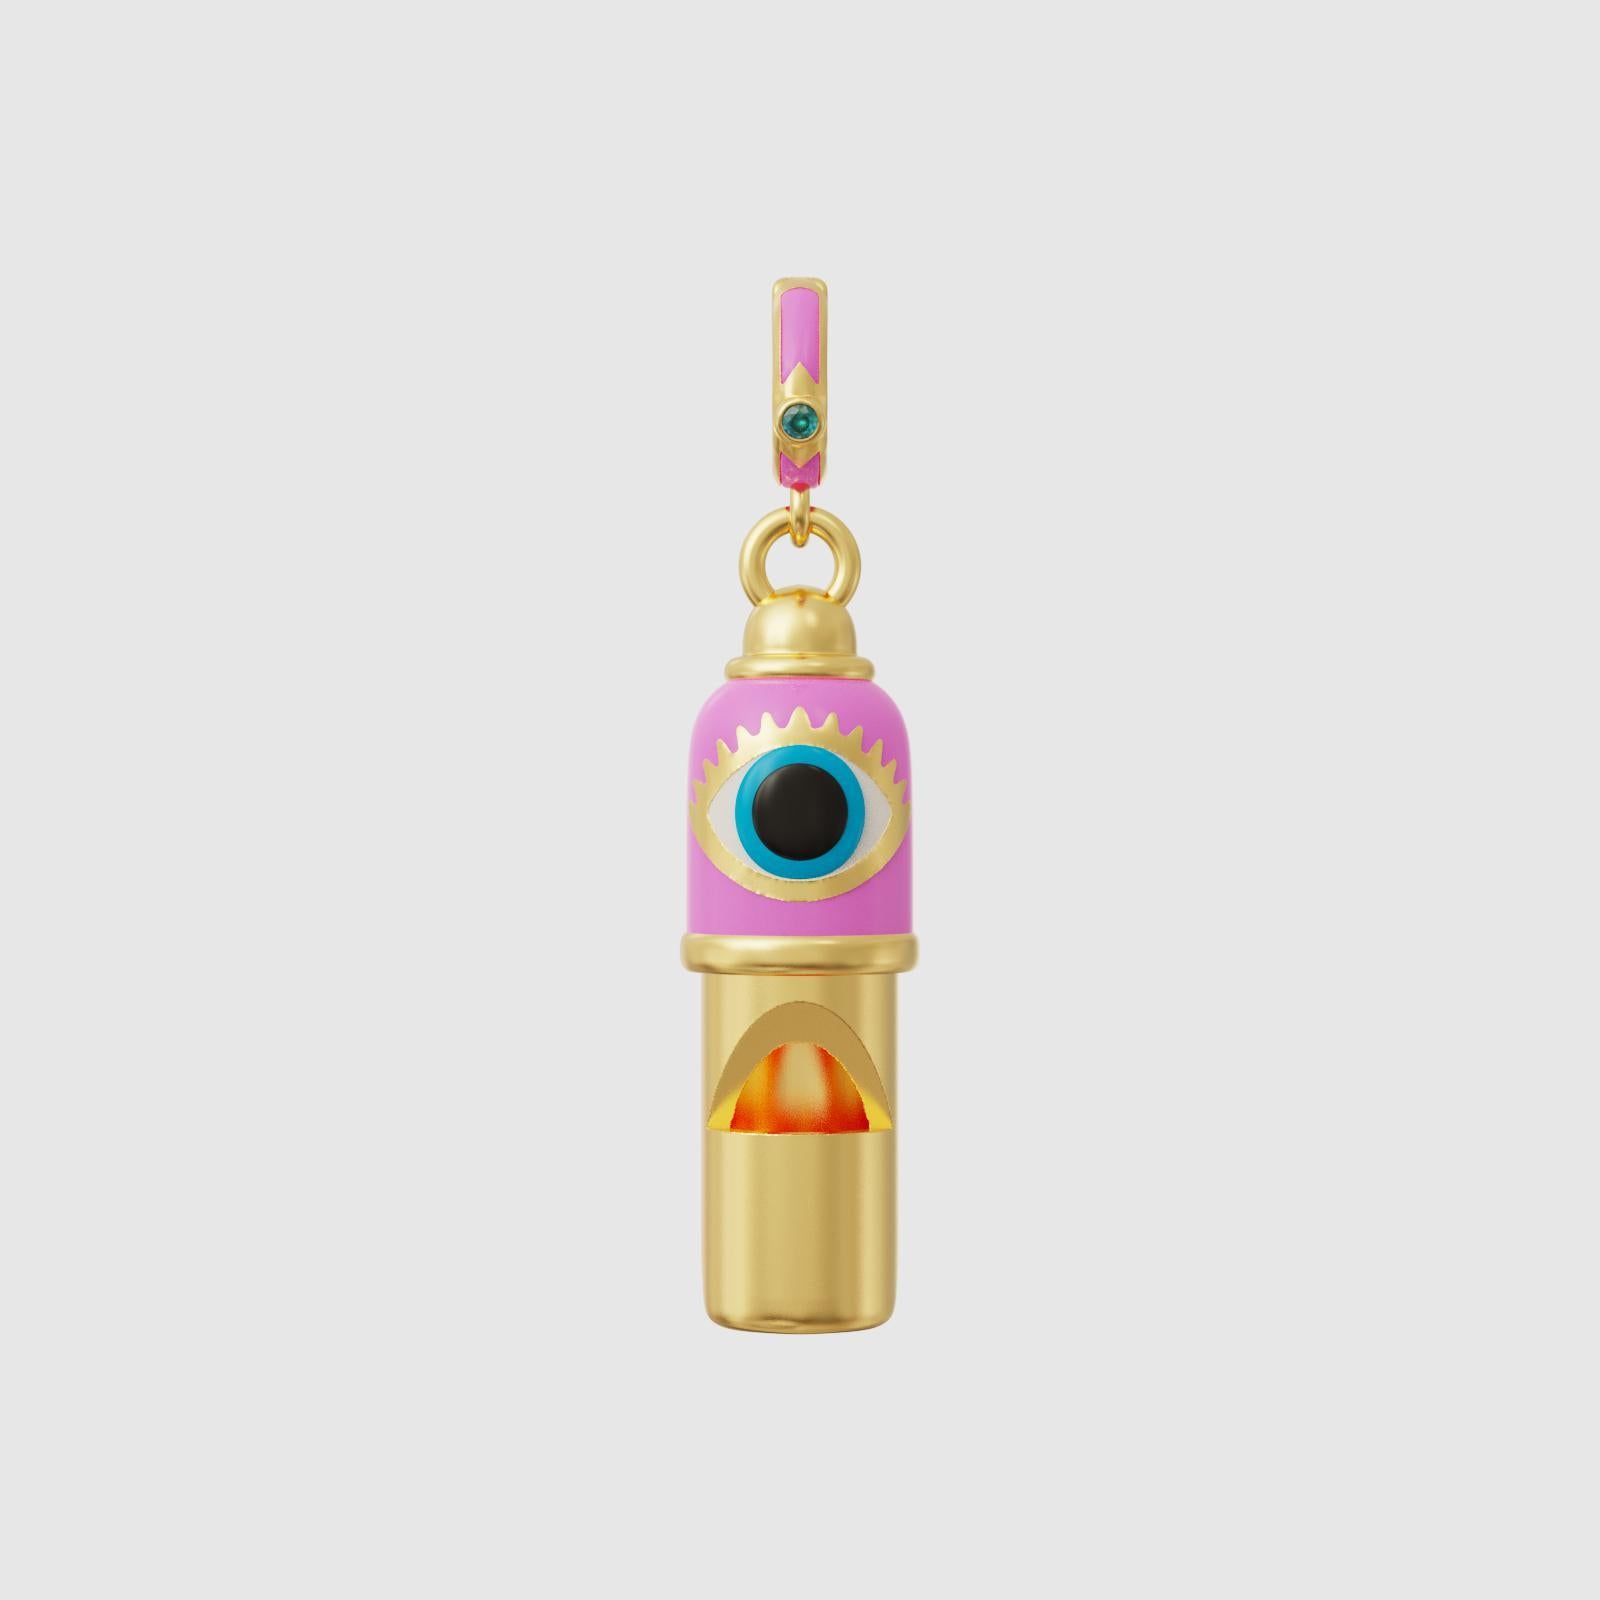 Introducing our exquisite Evil Eye Whistle Pendant Necklace, a stunning combination of elegance, functionality, and spiritual significance. This gold vermeil pendant is thoughtfully crafted to enhance your style while providing actual and spiritual